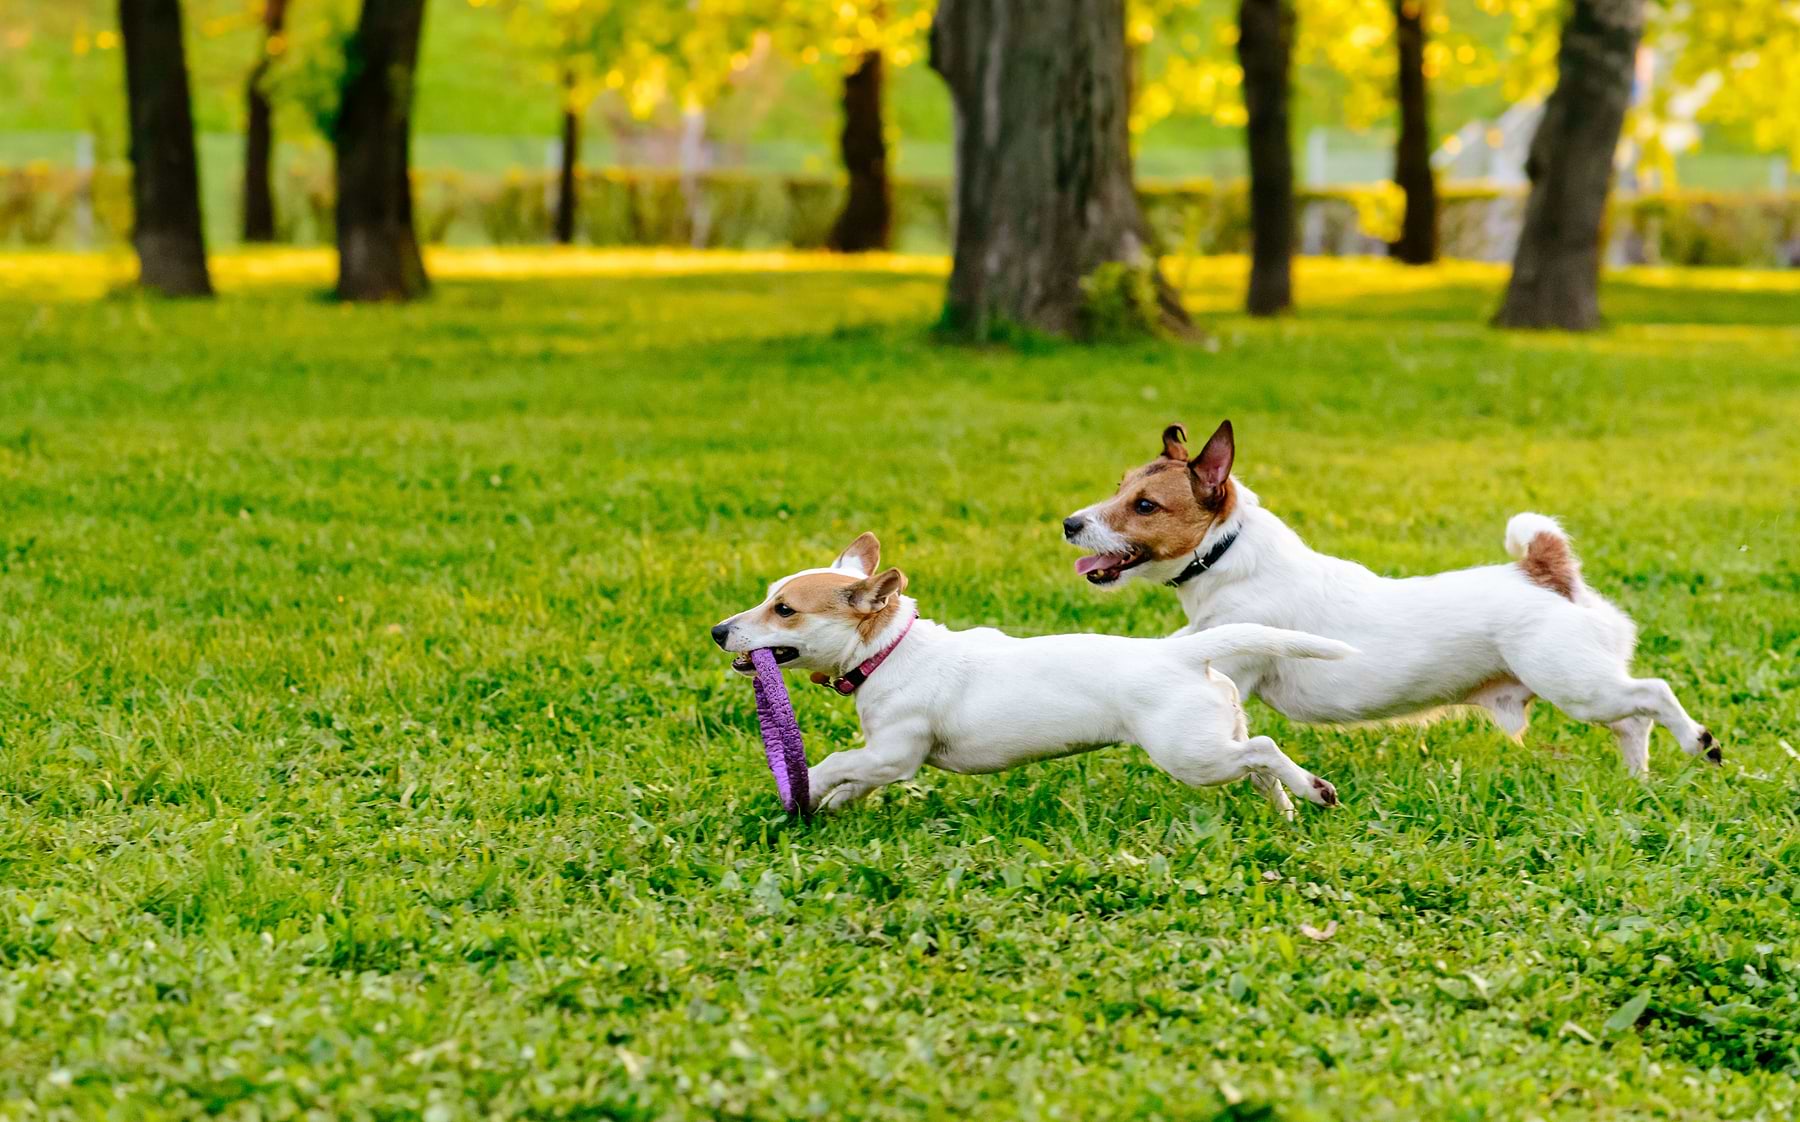 Two white and brown dogs are running on the grass. The smaller dog is carrying a round purple ring toy